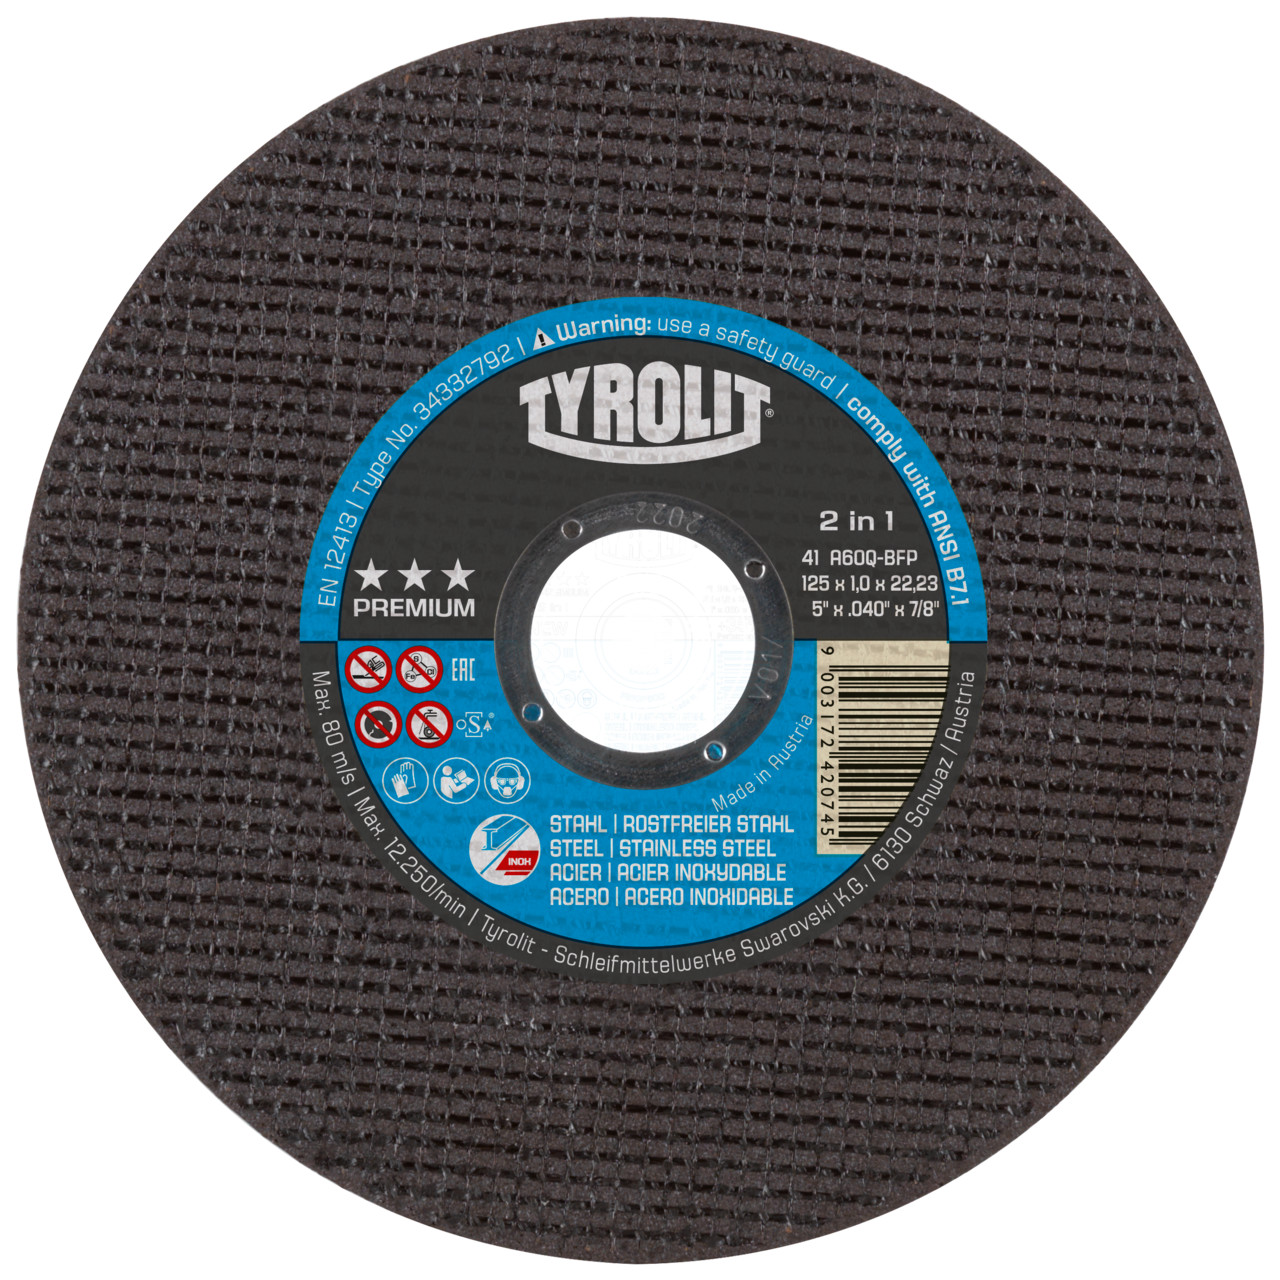 TYROLIT cut-off wheels DxDxH 230x3.0x22.23 2in1 for steel and stainless steel, shape: 41 - straight version, Art. 872344